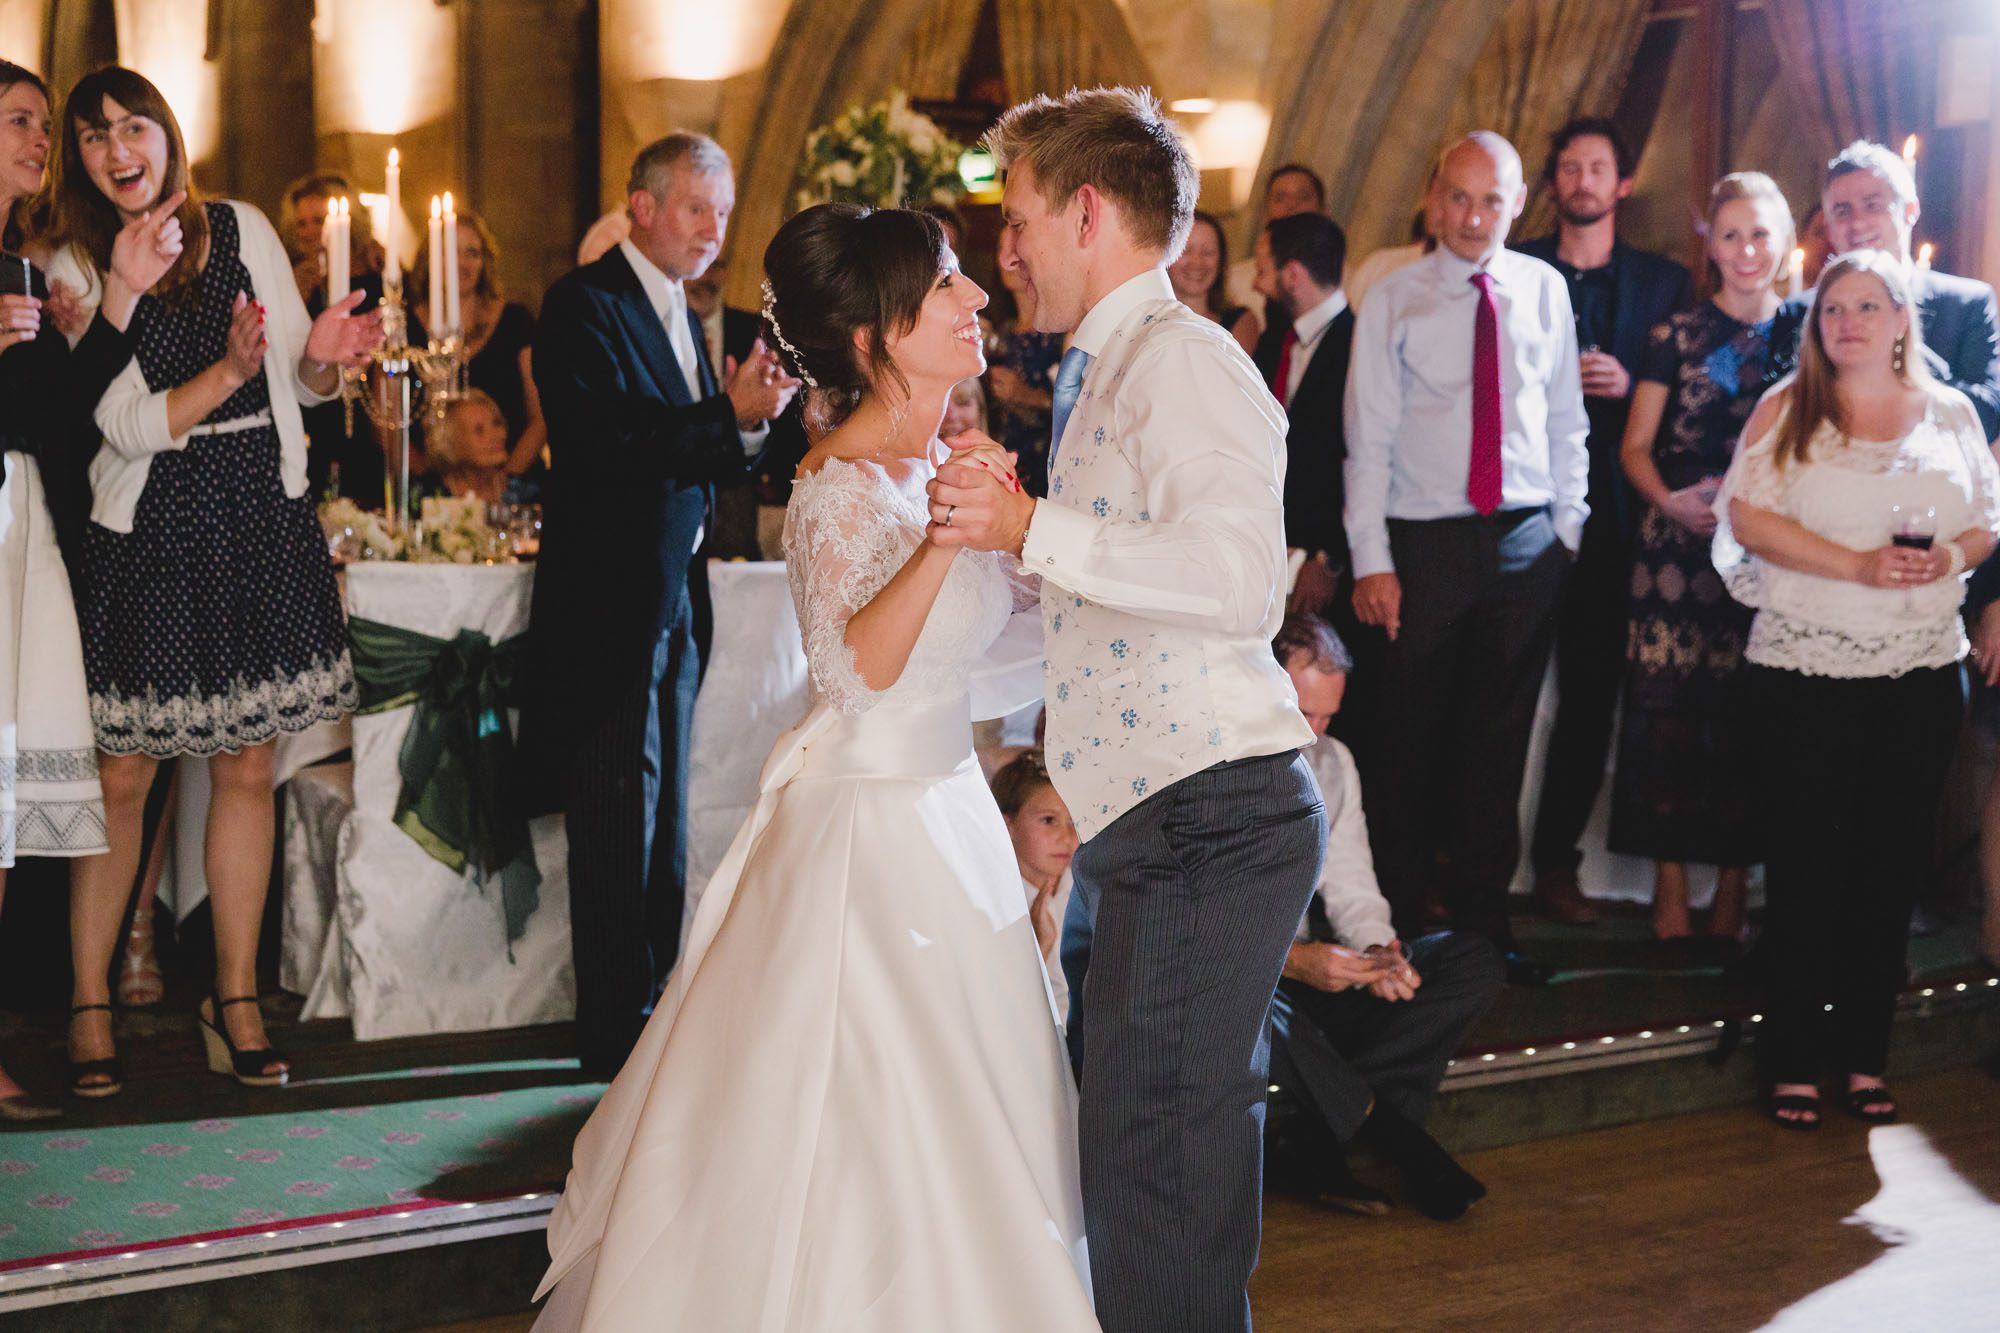 Bride and groom have their first dance together on their wedding day at Ashdown Park.